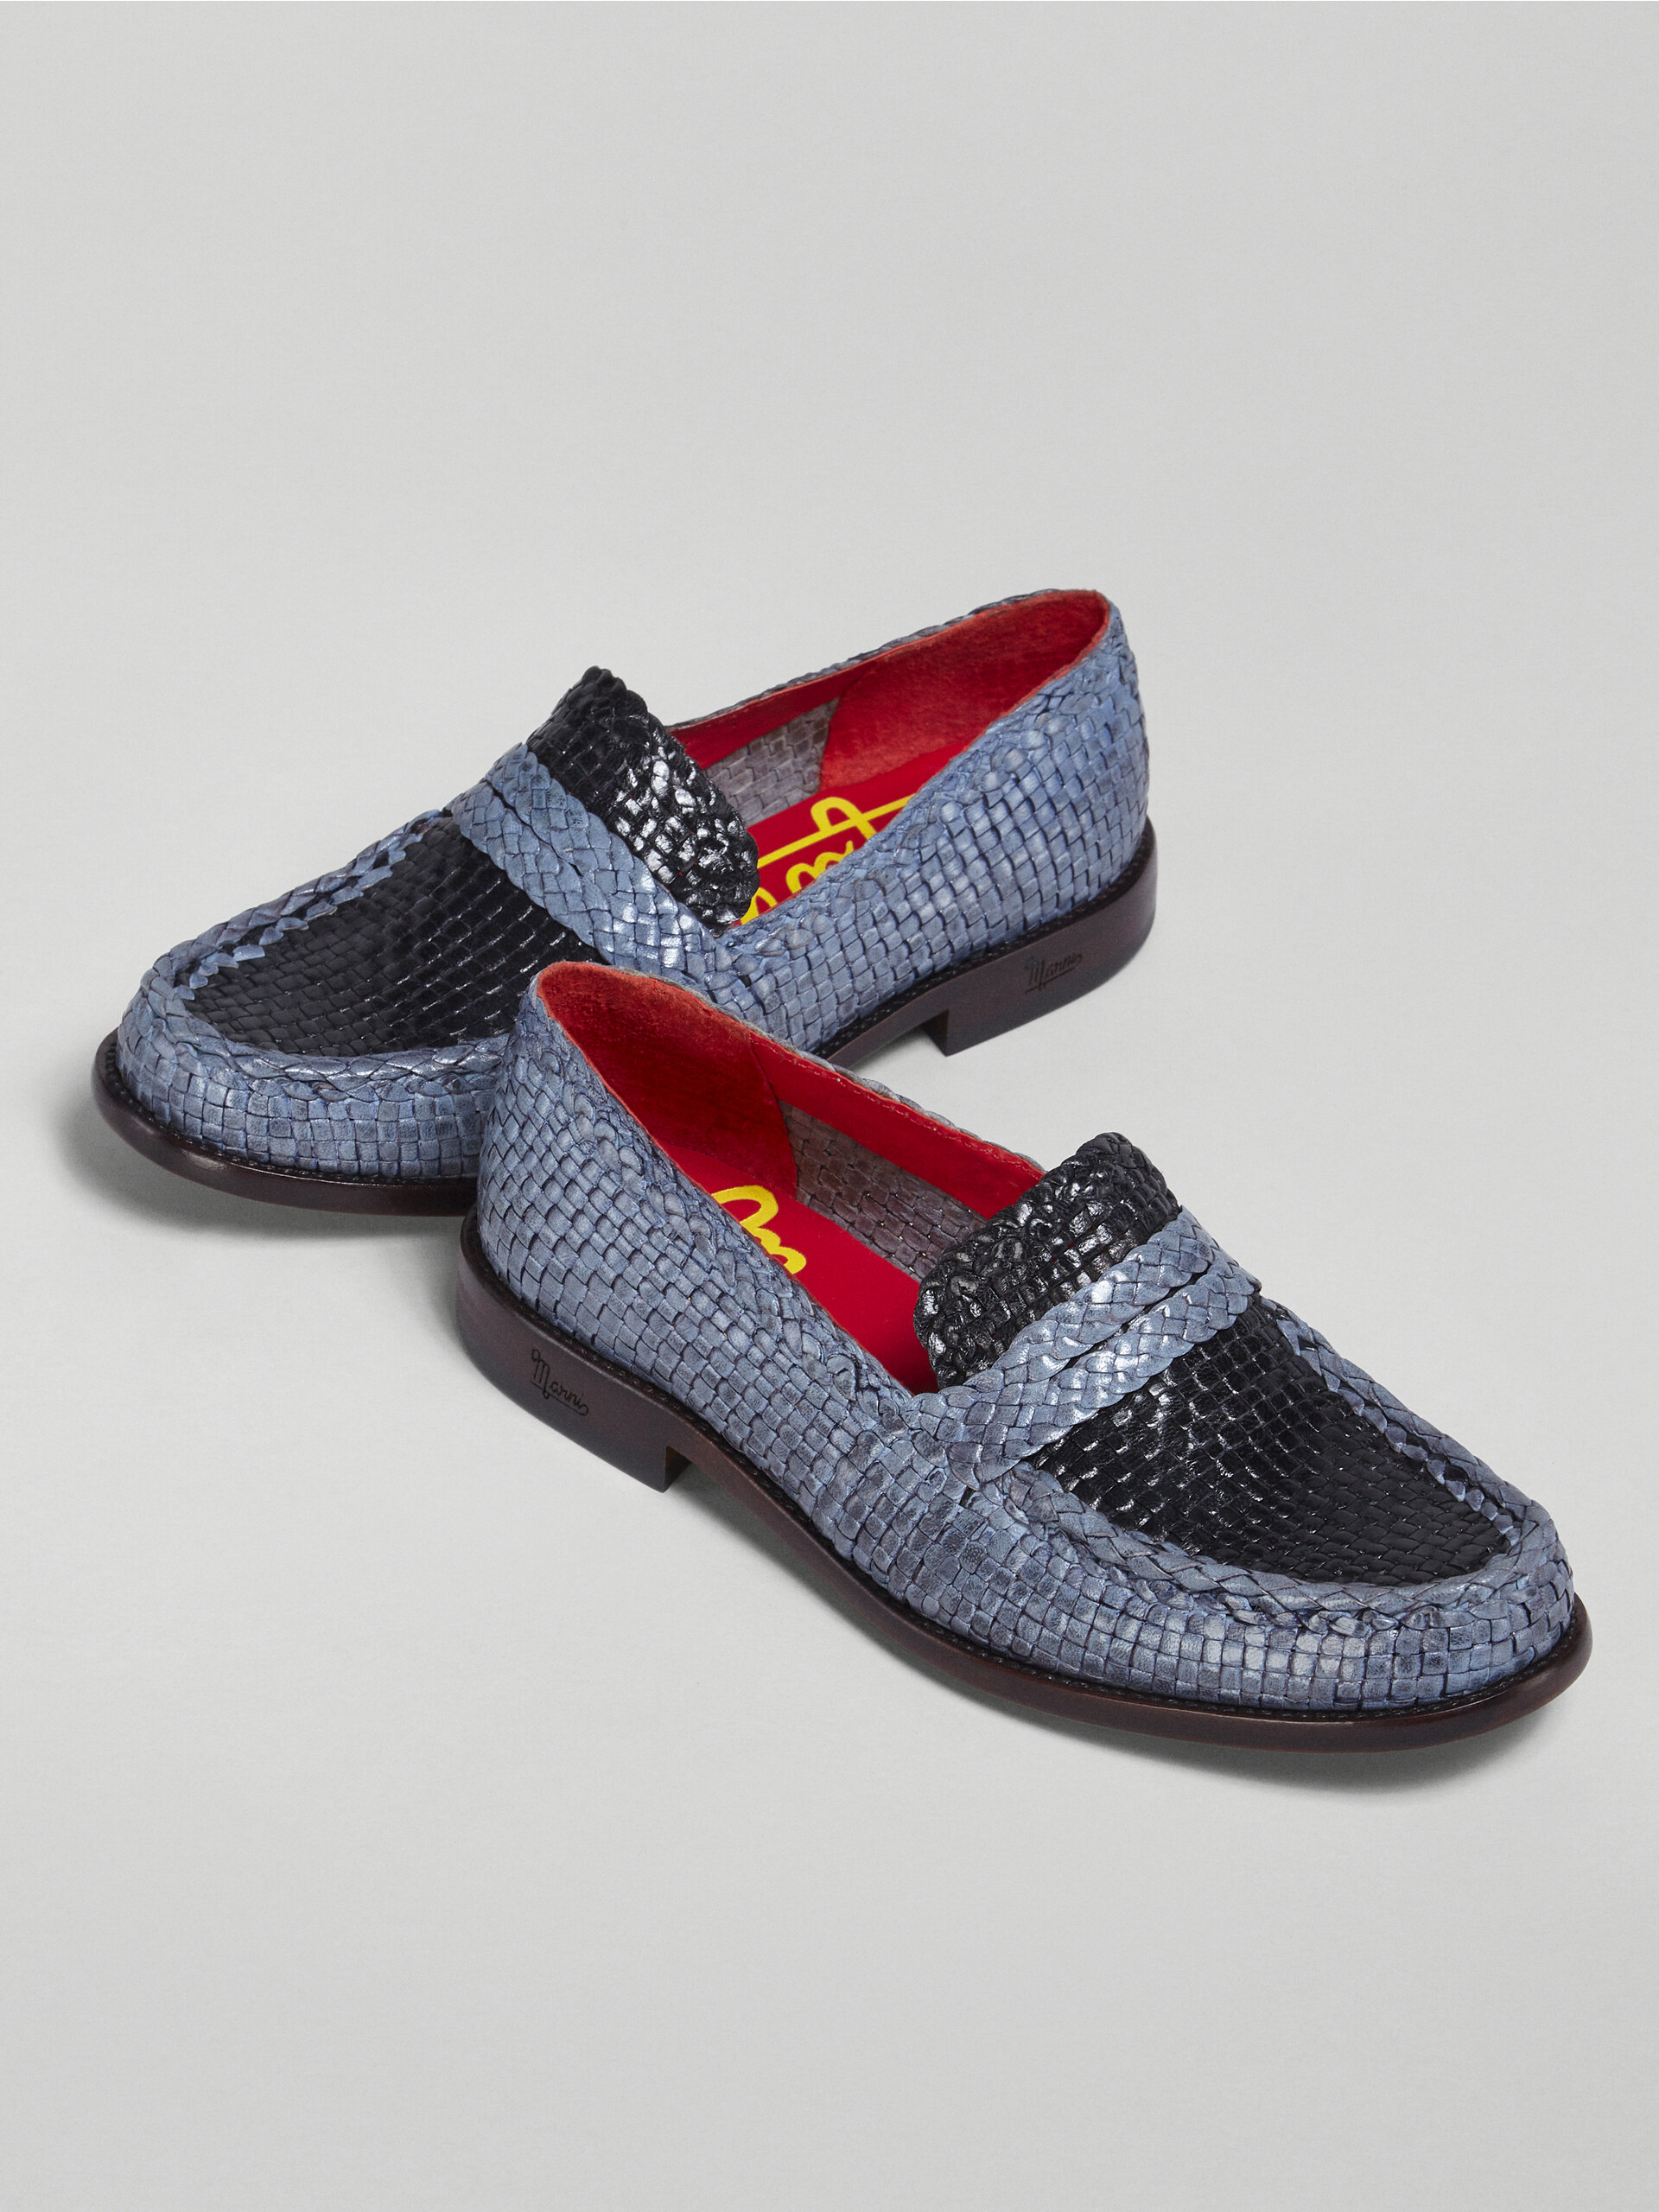 Black and blue woven leather moccasin - Mocassin - Image 5